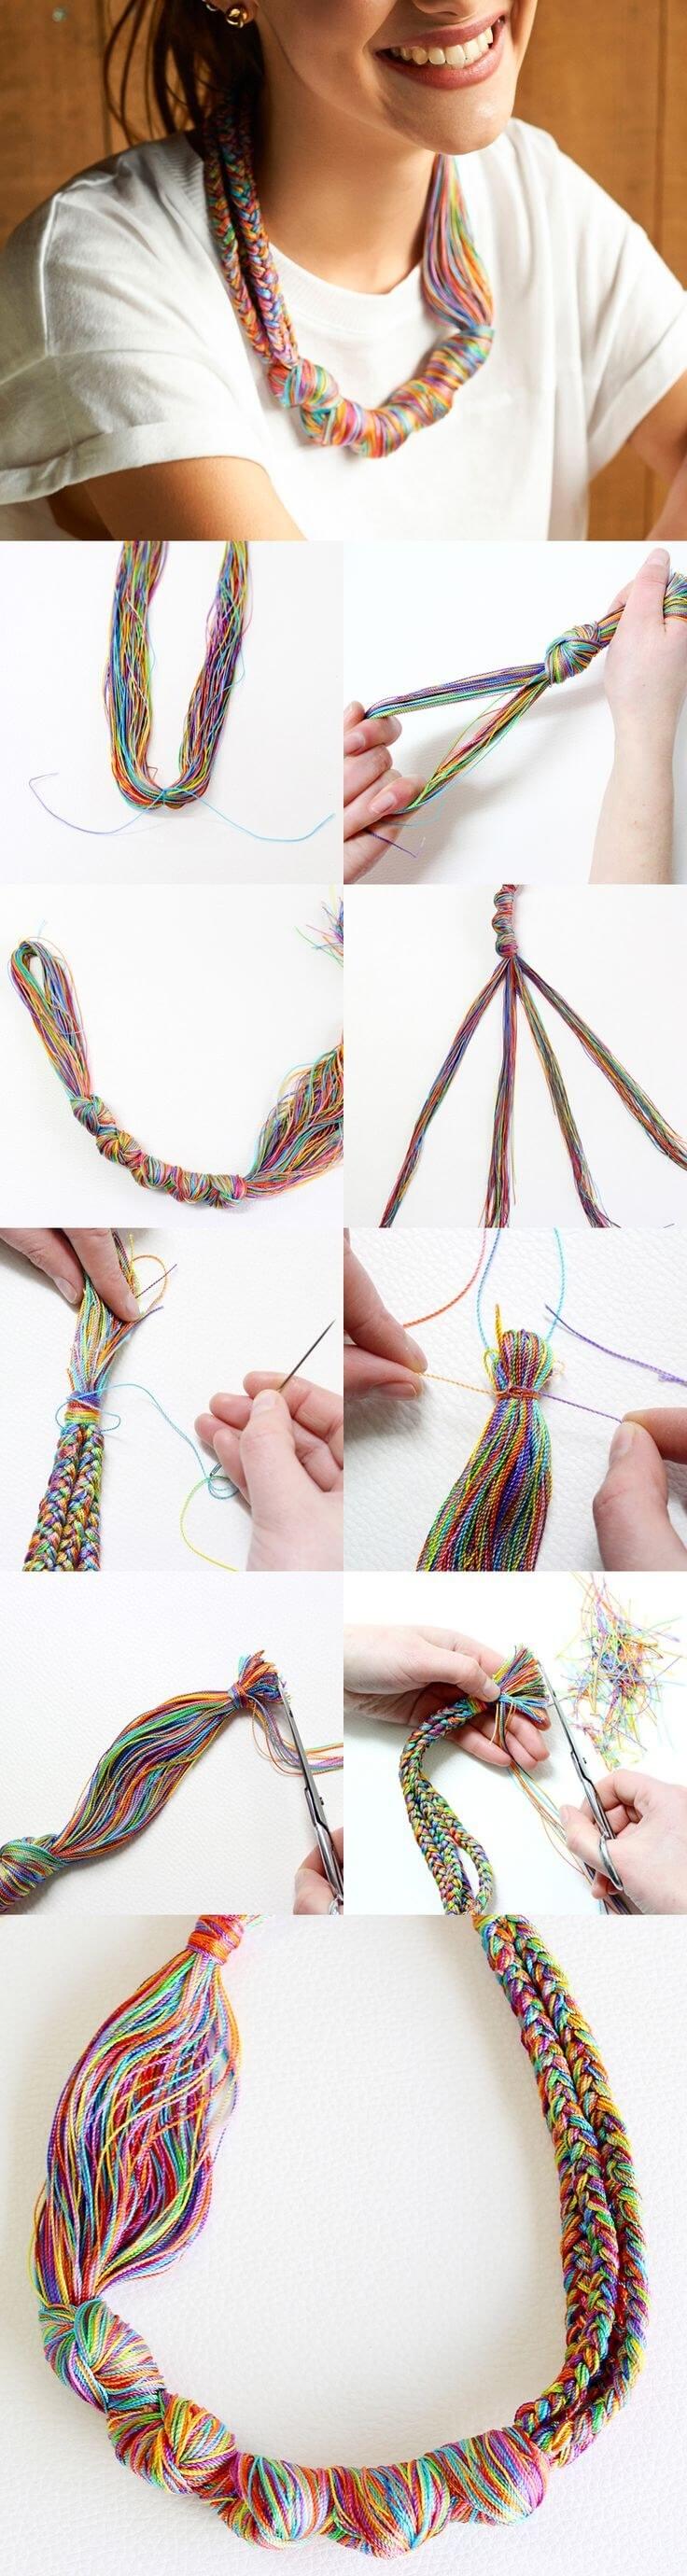 DIY Embroidery Thread Necklace Cheap And Easy Last-Minute DIY Gifts Ideas